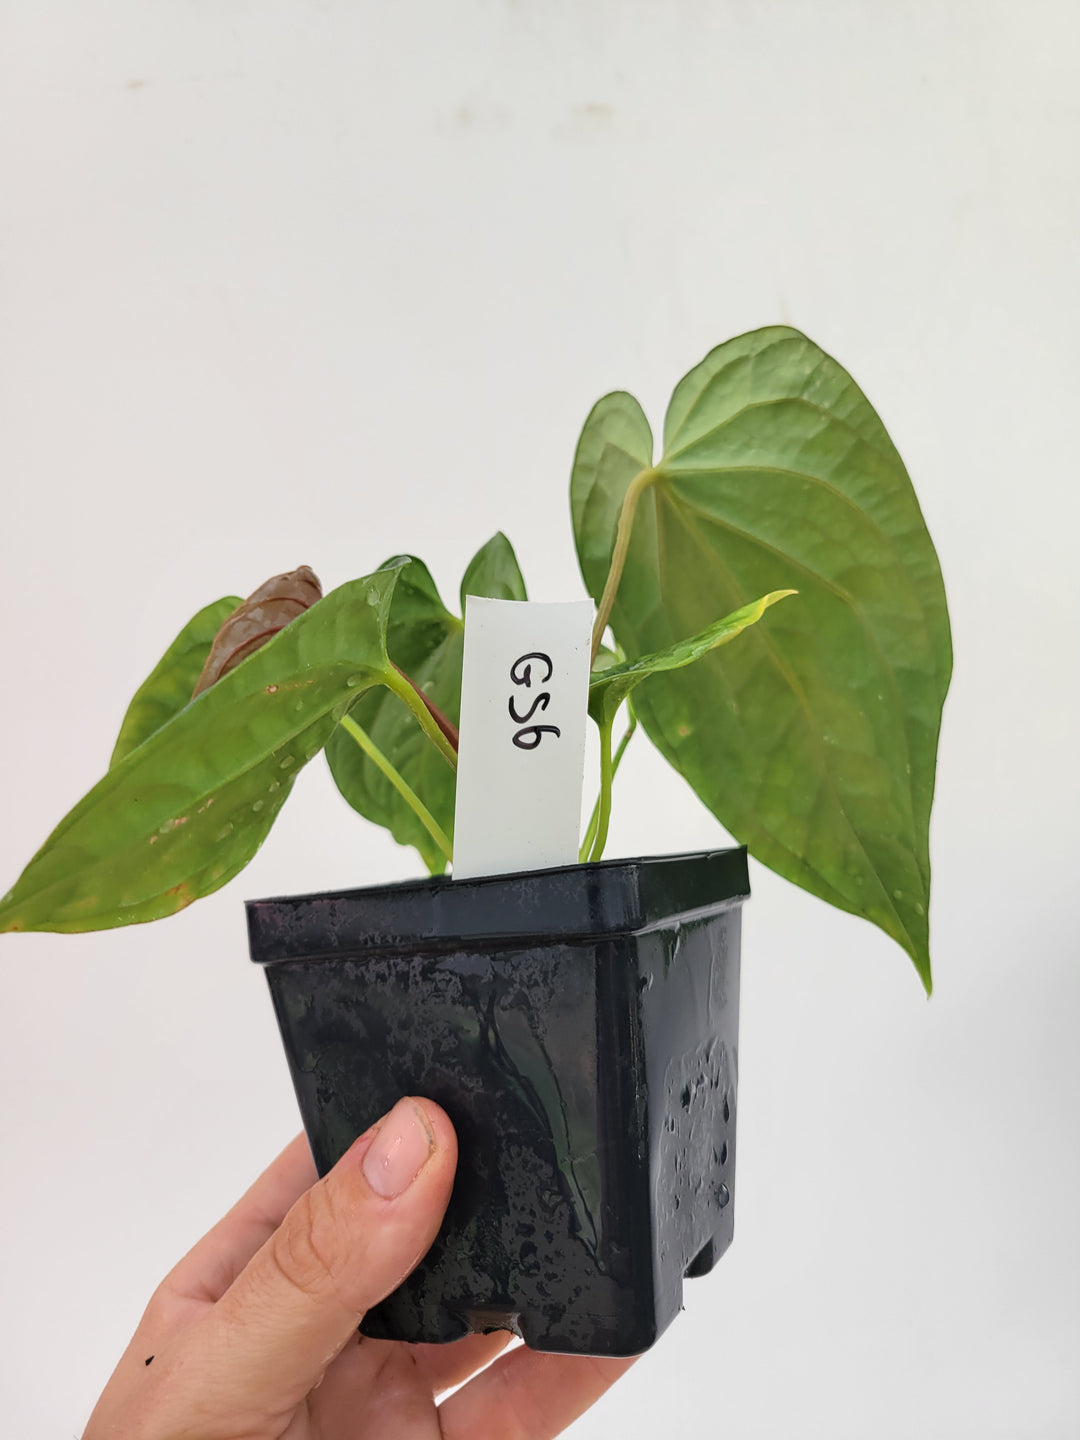 Anthurium Hoffmannii X  A. Luxurians , 2 plants in pot! New Hybrid by NPGP, exact plant pictured,  seed Grown. US seller, #G56 - Nice Plants Good Pots